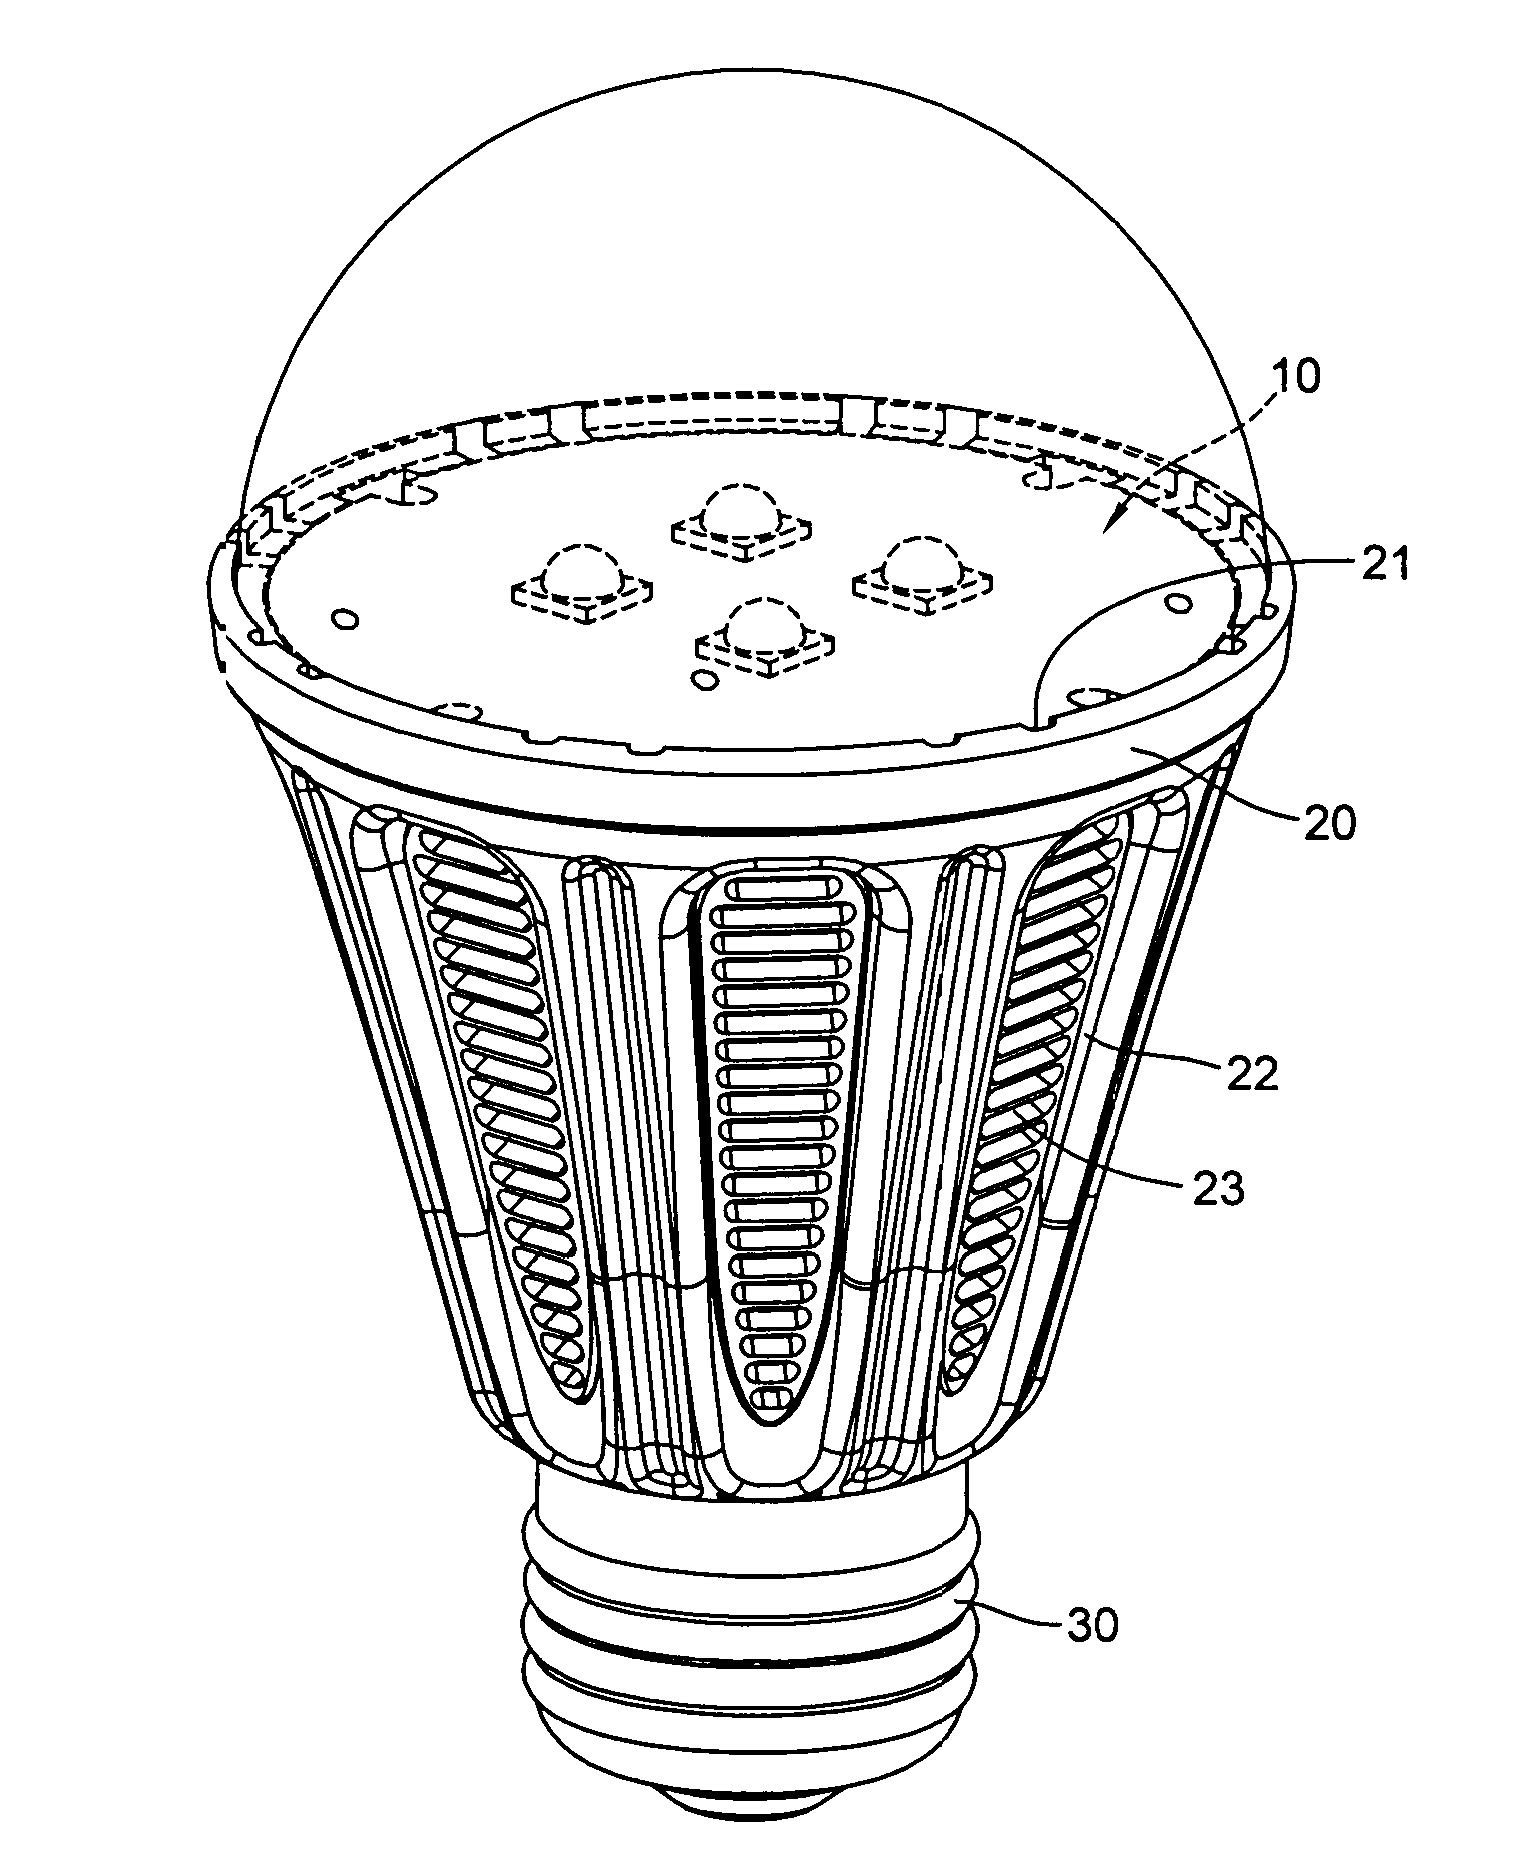 LED lamp structure having free convection cooling